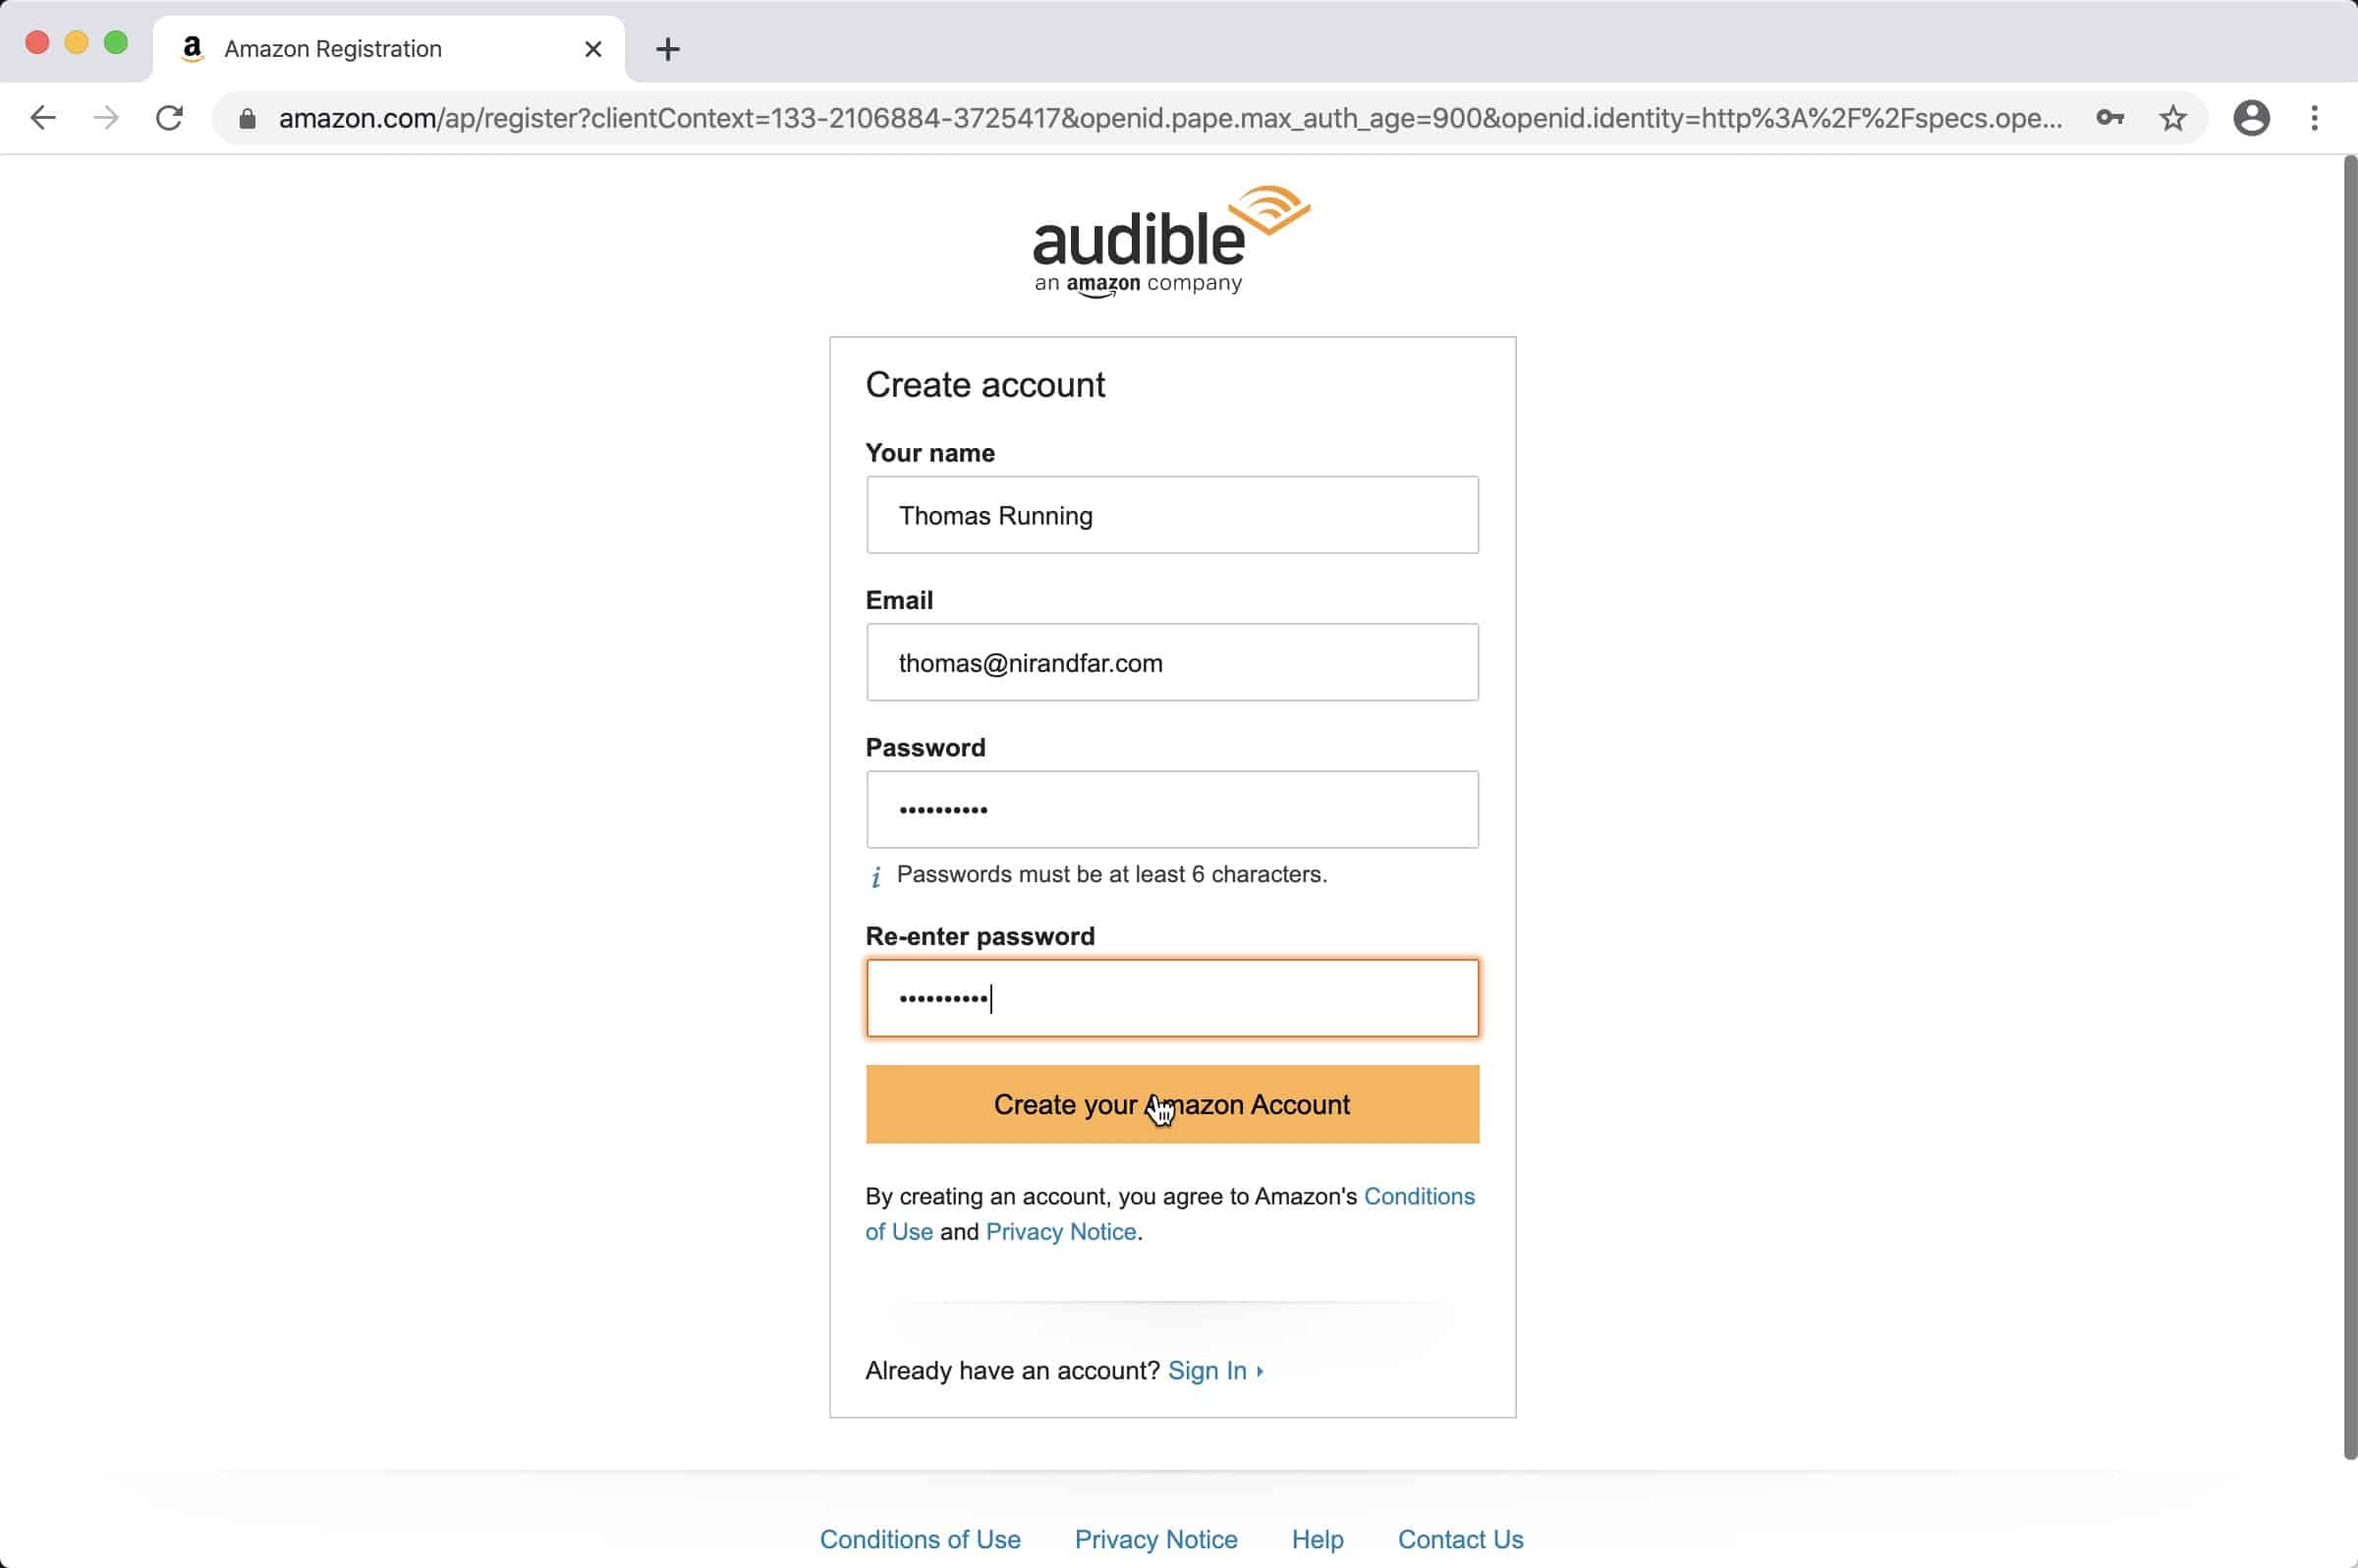 Complete the form, then click Create your Amazon Account 